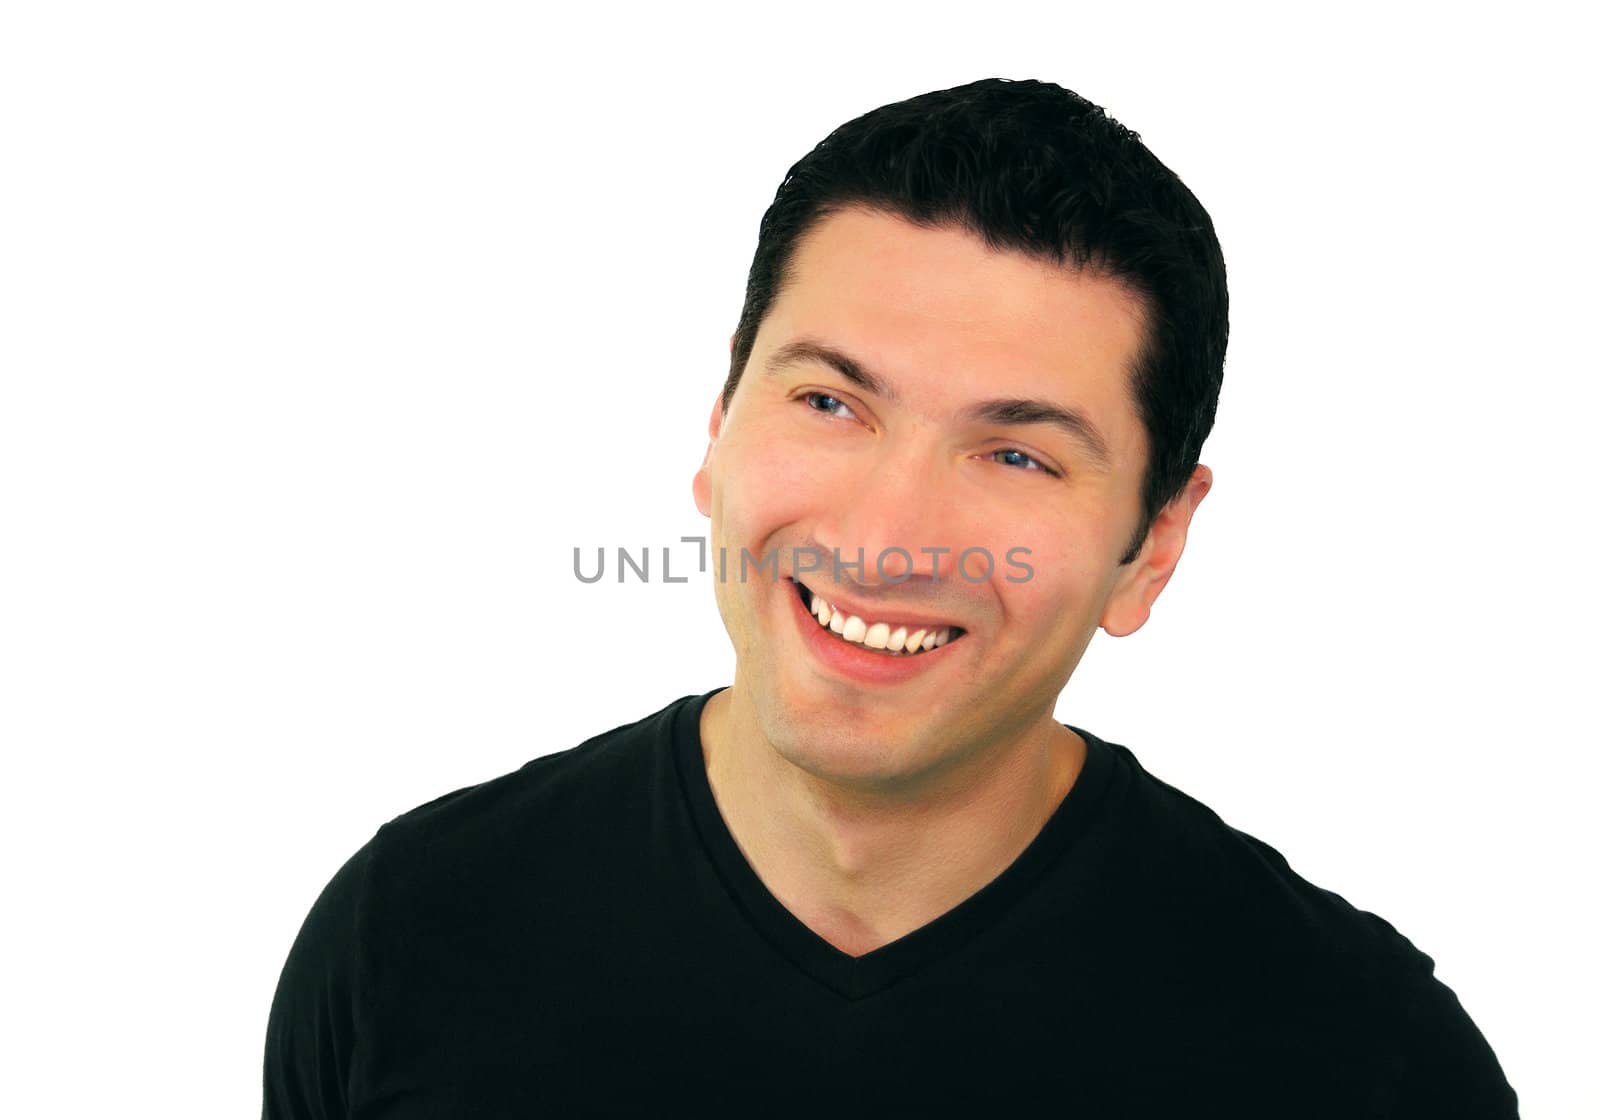 A portrait of a smiling man in his thirties wearing black t-shirt over white background.